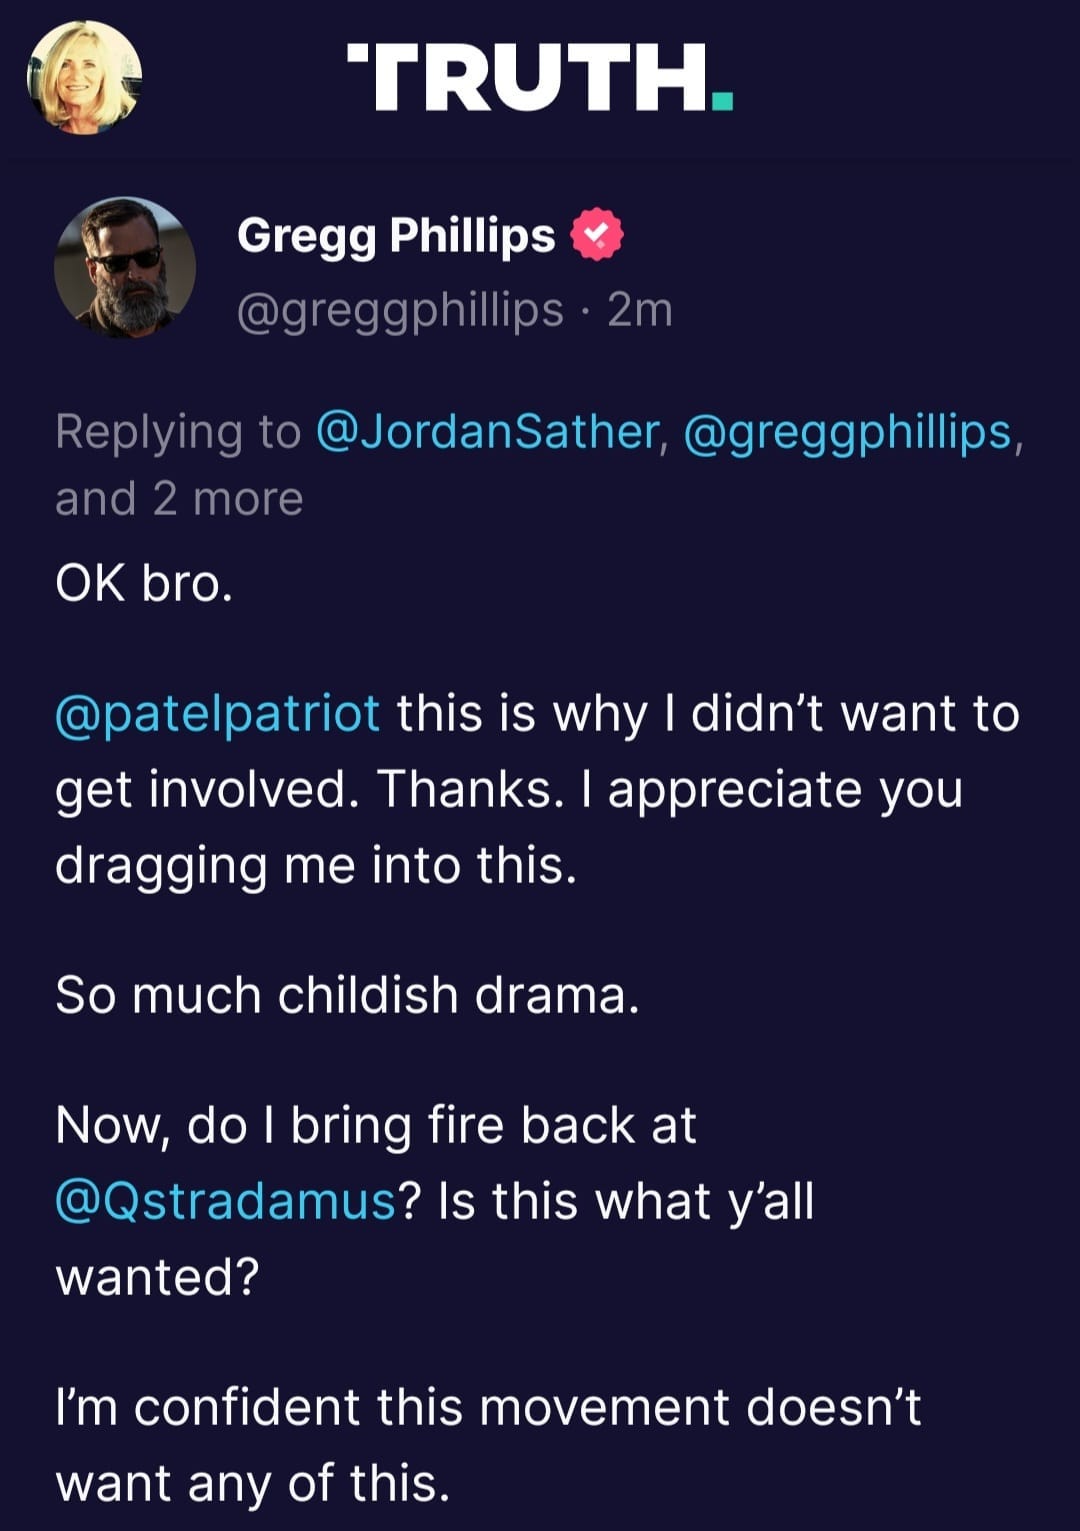 May be a Twitter screenshot of 2 people and text that says 'TRUTH. Gregg Phillips @greggphillips·2m Replying to @JordanSather @greggphillips, and 2 more OK bro. @patelpatriot this is why didn't want to get involved. Thanks. appreciate you dragging me into this. So much childish drama. Now do bring fire back at @Qstradamus? Is this what y'all wanted? I'm confident this movement doesn't want any of this.'